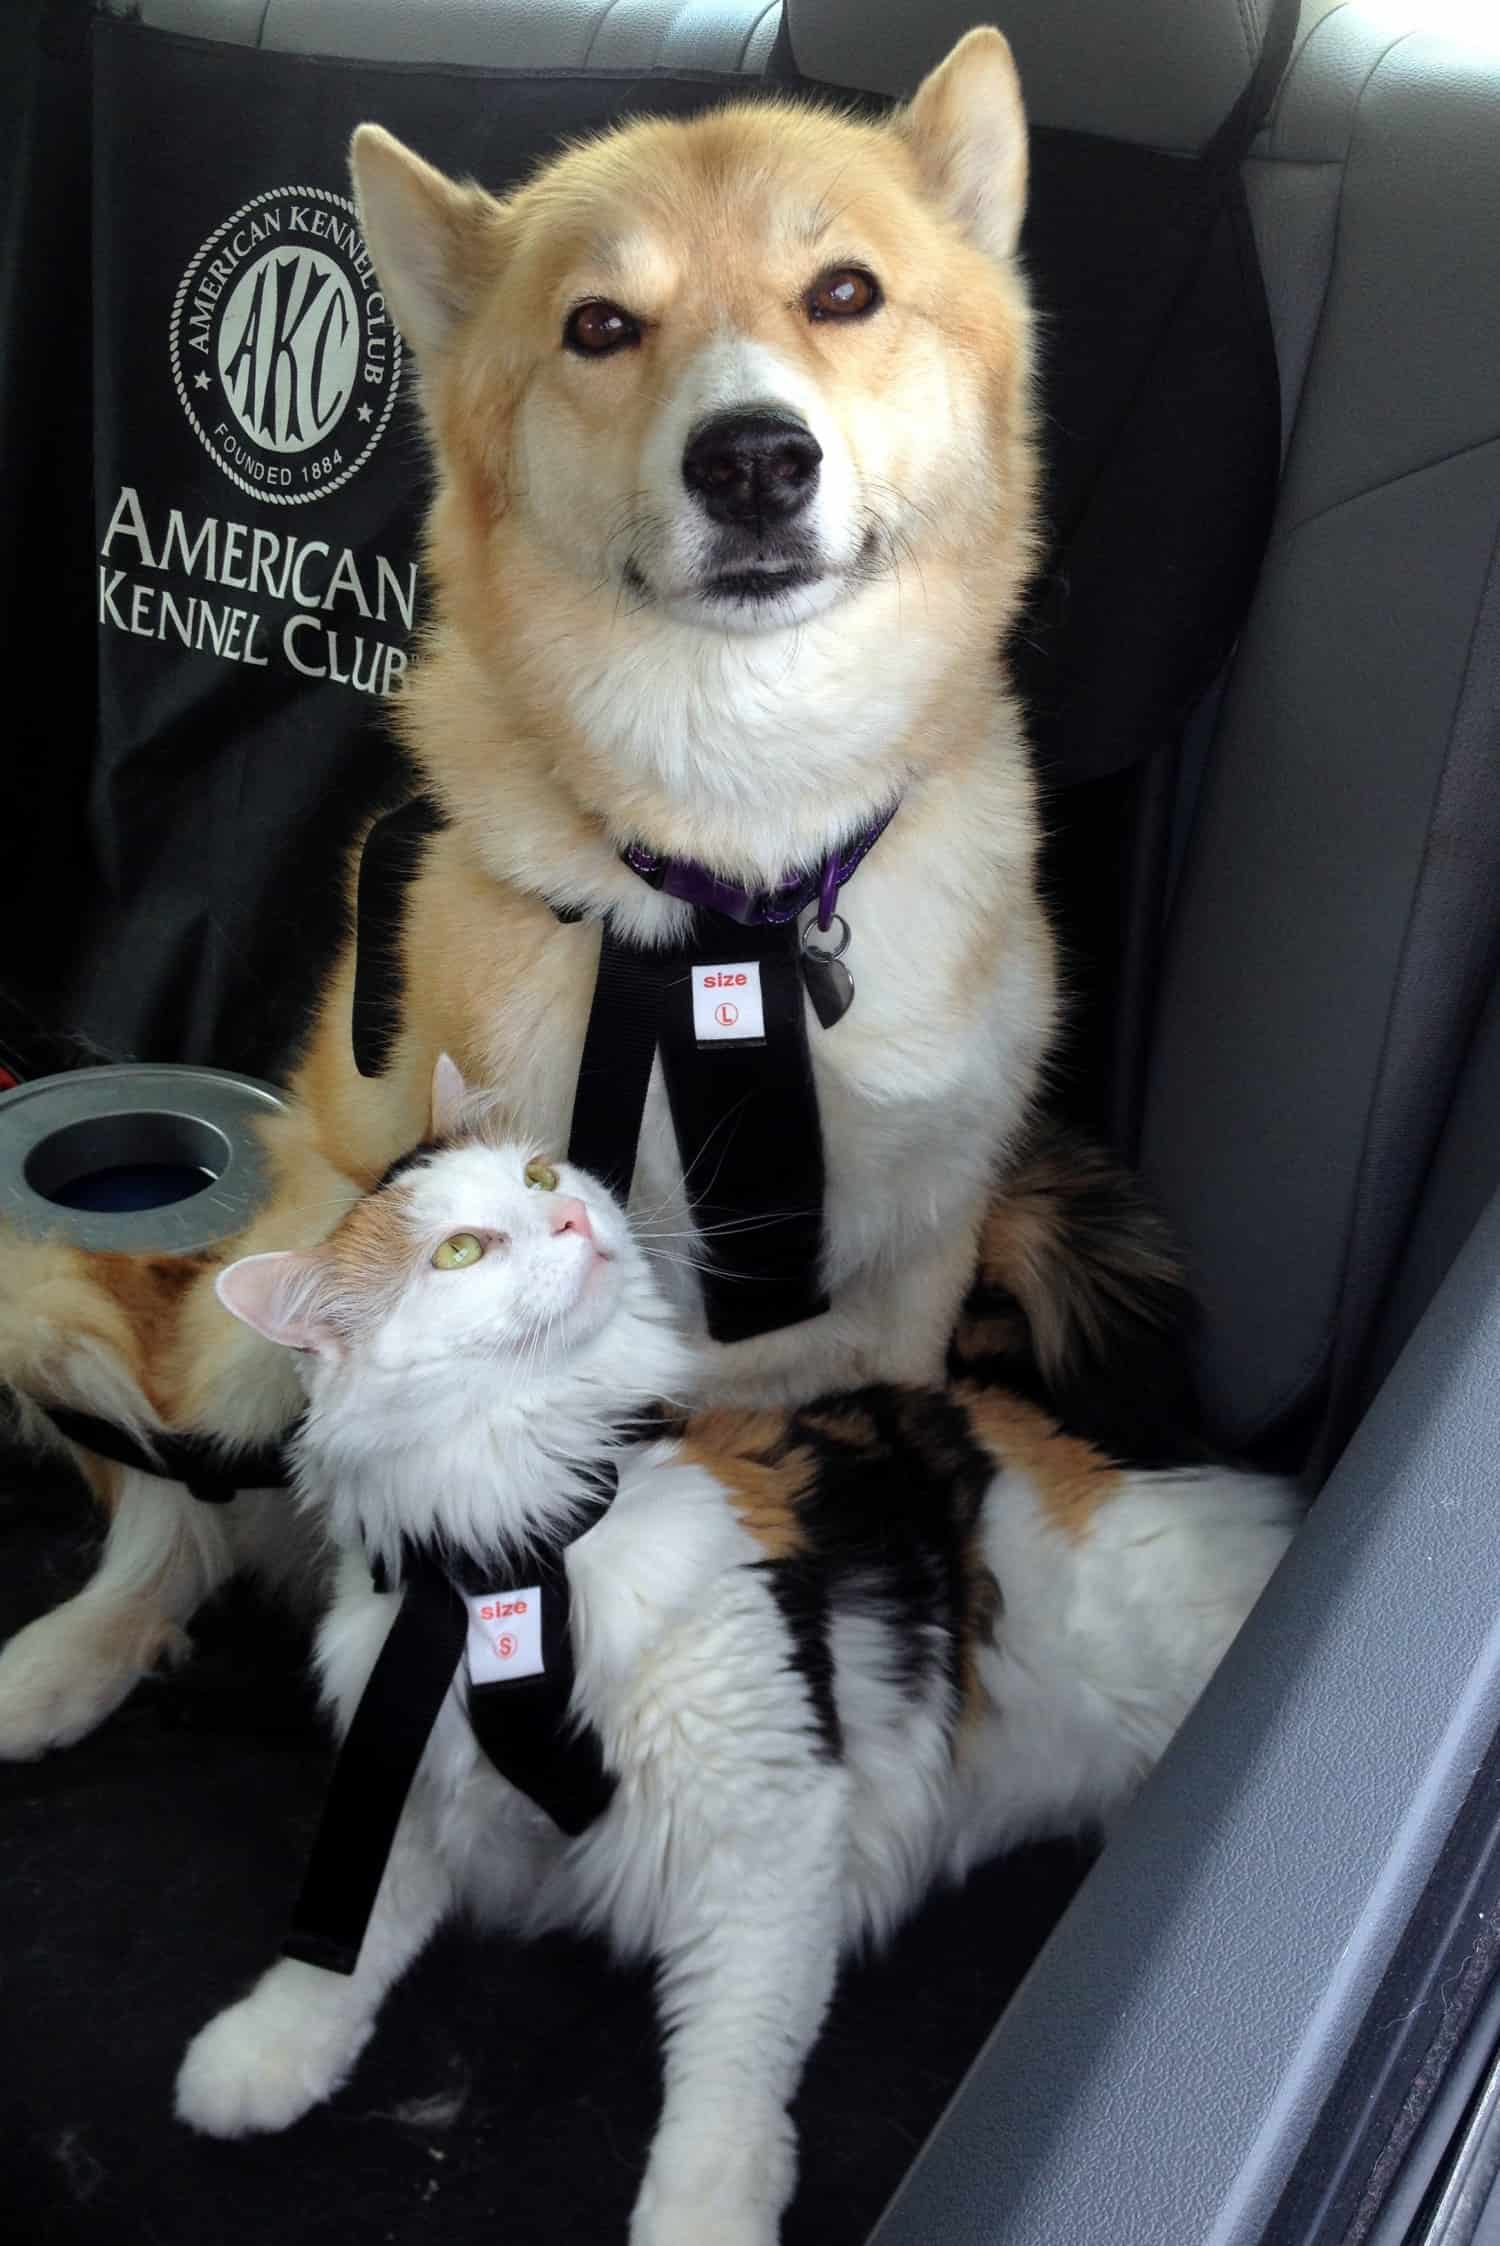 A harness is one other way of keeping cats safe in the car. Cat and dog in harnesses in back seat.